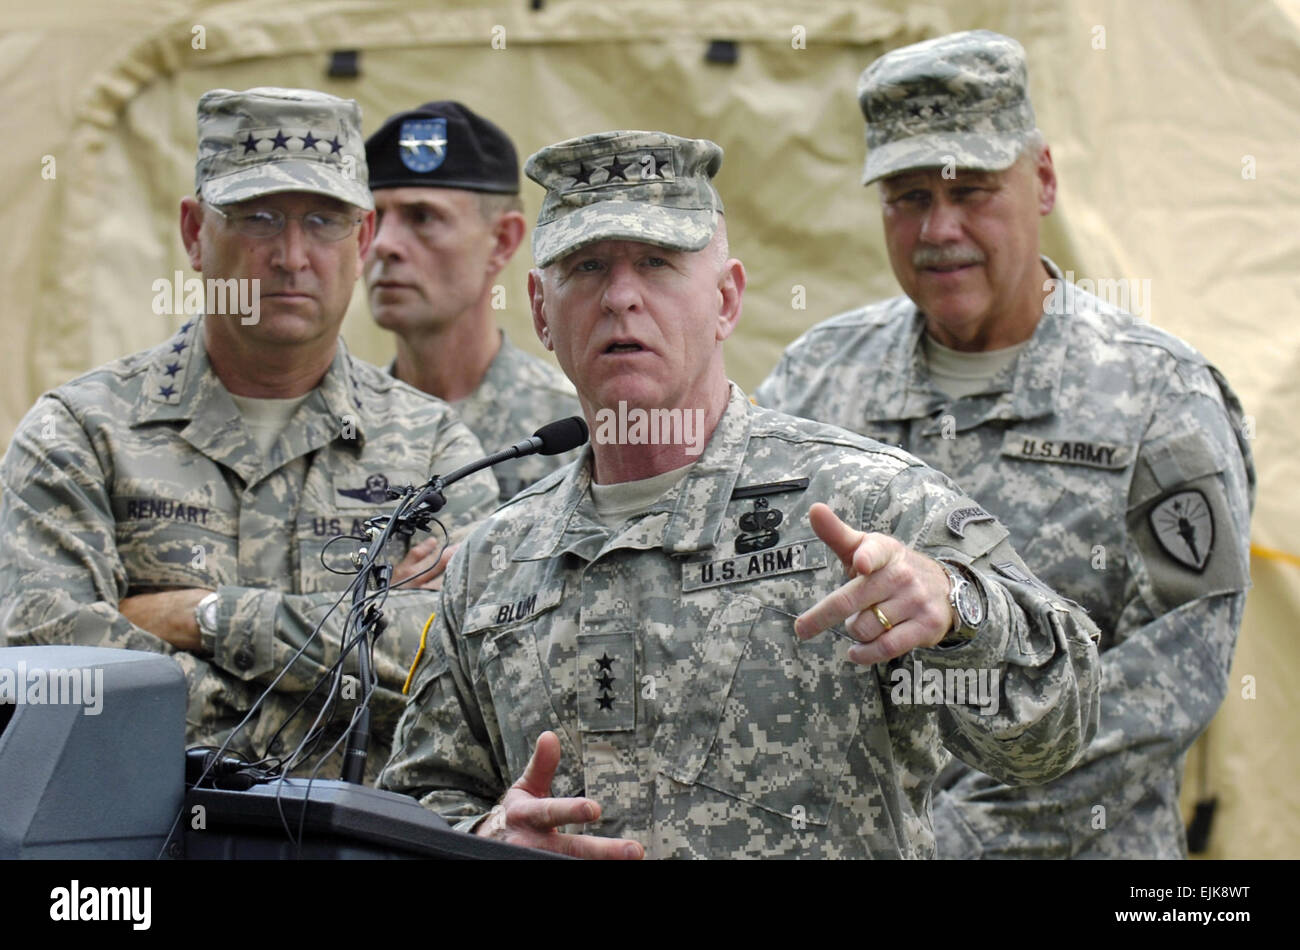 U.S. Army Lt. Gen. H. Steven Blum, Chief, National Guard Bureau, speaks during a press conference at the Muscatatuck Urban Training Center near North Vernon, Ind., May 12, 2007. Behind Blum are, from left, Air Force Gen. Victor E. Renuart Jr., commander of the North American Aerospace Defense Command and United States Northern Command; Army Maj. Gen. Bruce E. Davis, the commander of Joint Task Force Civil Support; and Army Maj. Gen. R.Martin Umbarger, Indiana Adjutant General. The generals are visitingwith troops participating in Vigilant Guard, which is a joint military and civilian emergency Stock Photo